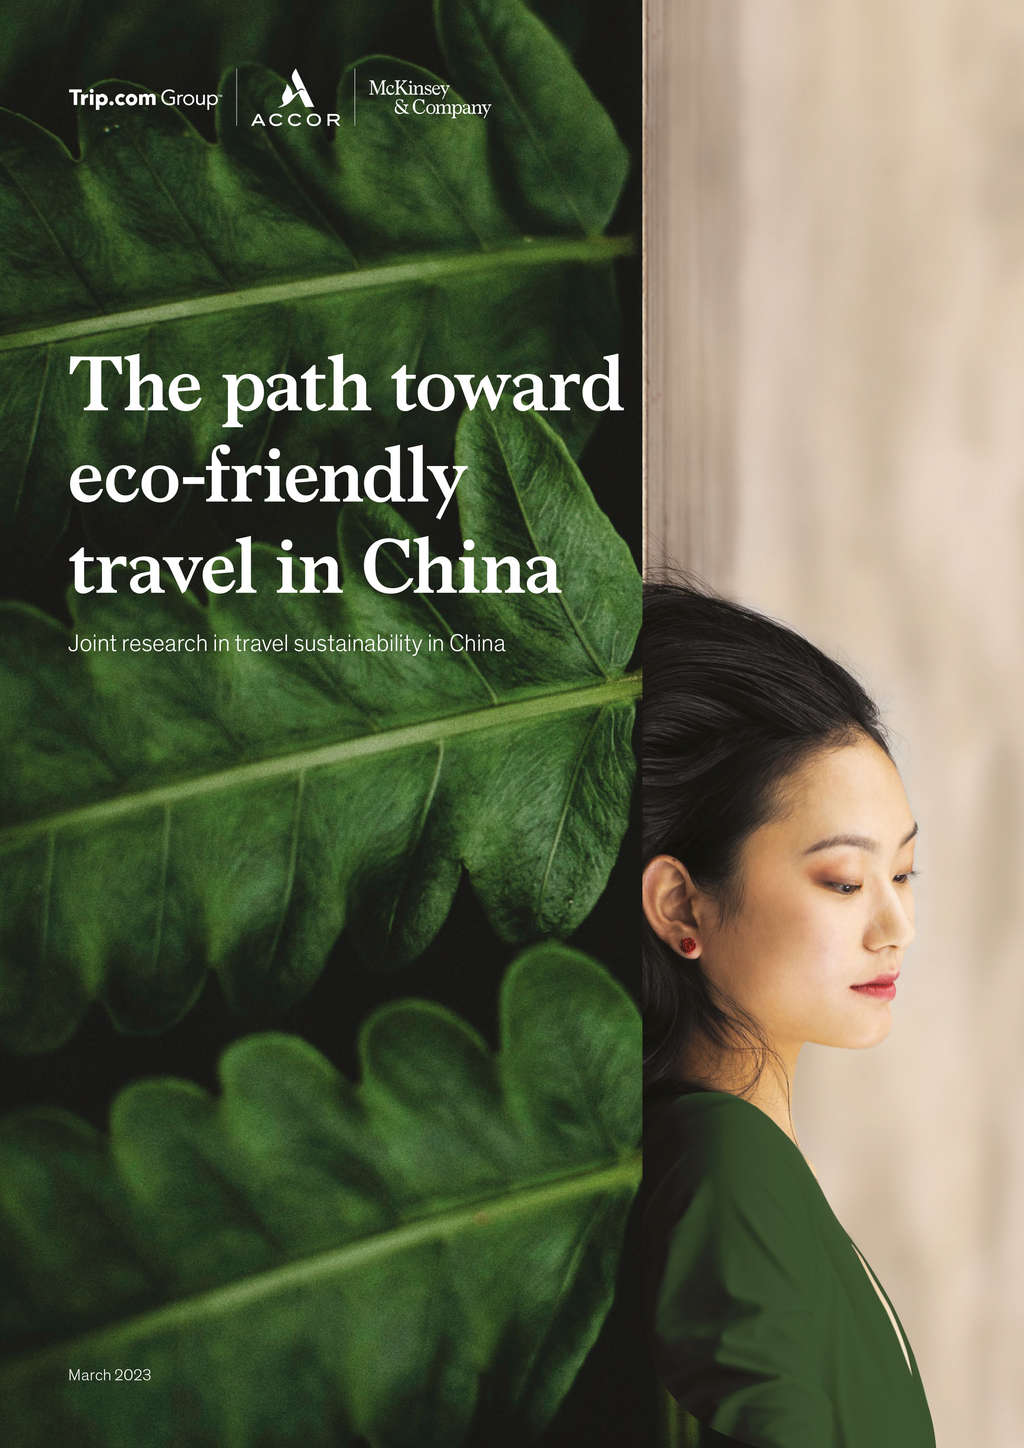 New Report: Promoting a Sustainable Future for China's Travel Industry— Source: TRIP.com